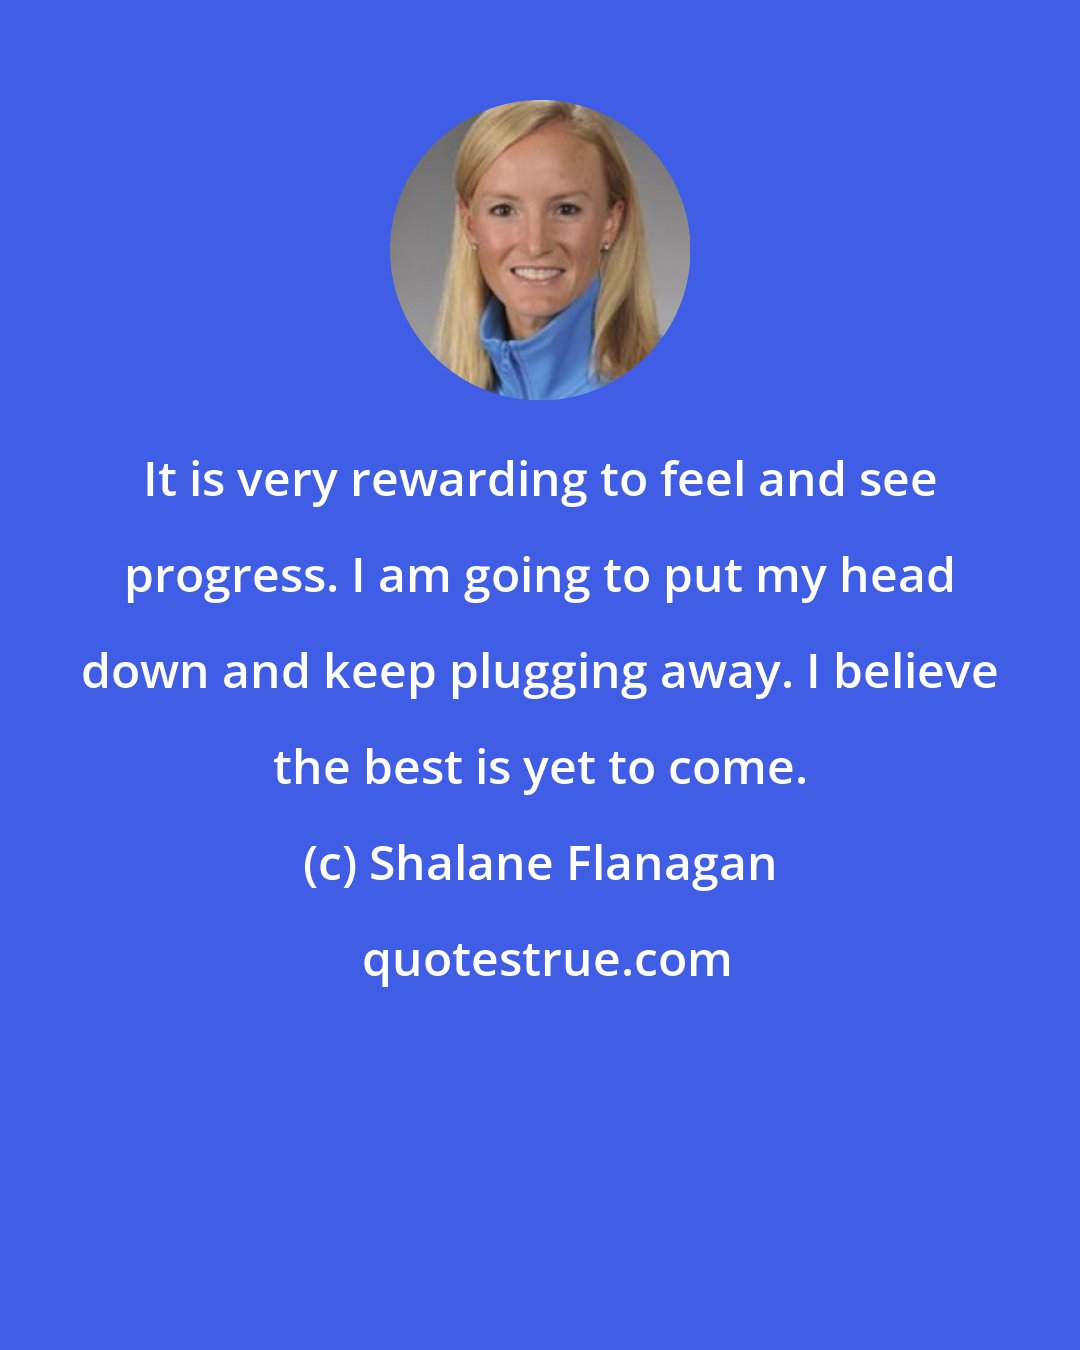 Shalane Flanagan: It is very rewarding to feel and see progress. I am going to put my head down and keep plugging away. I believe the best is yet to come.